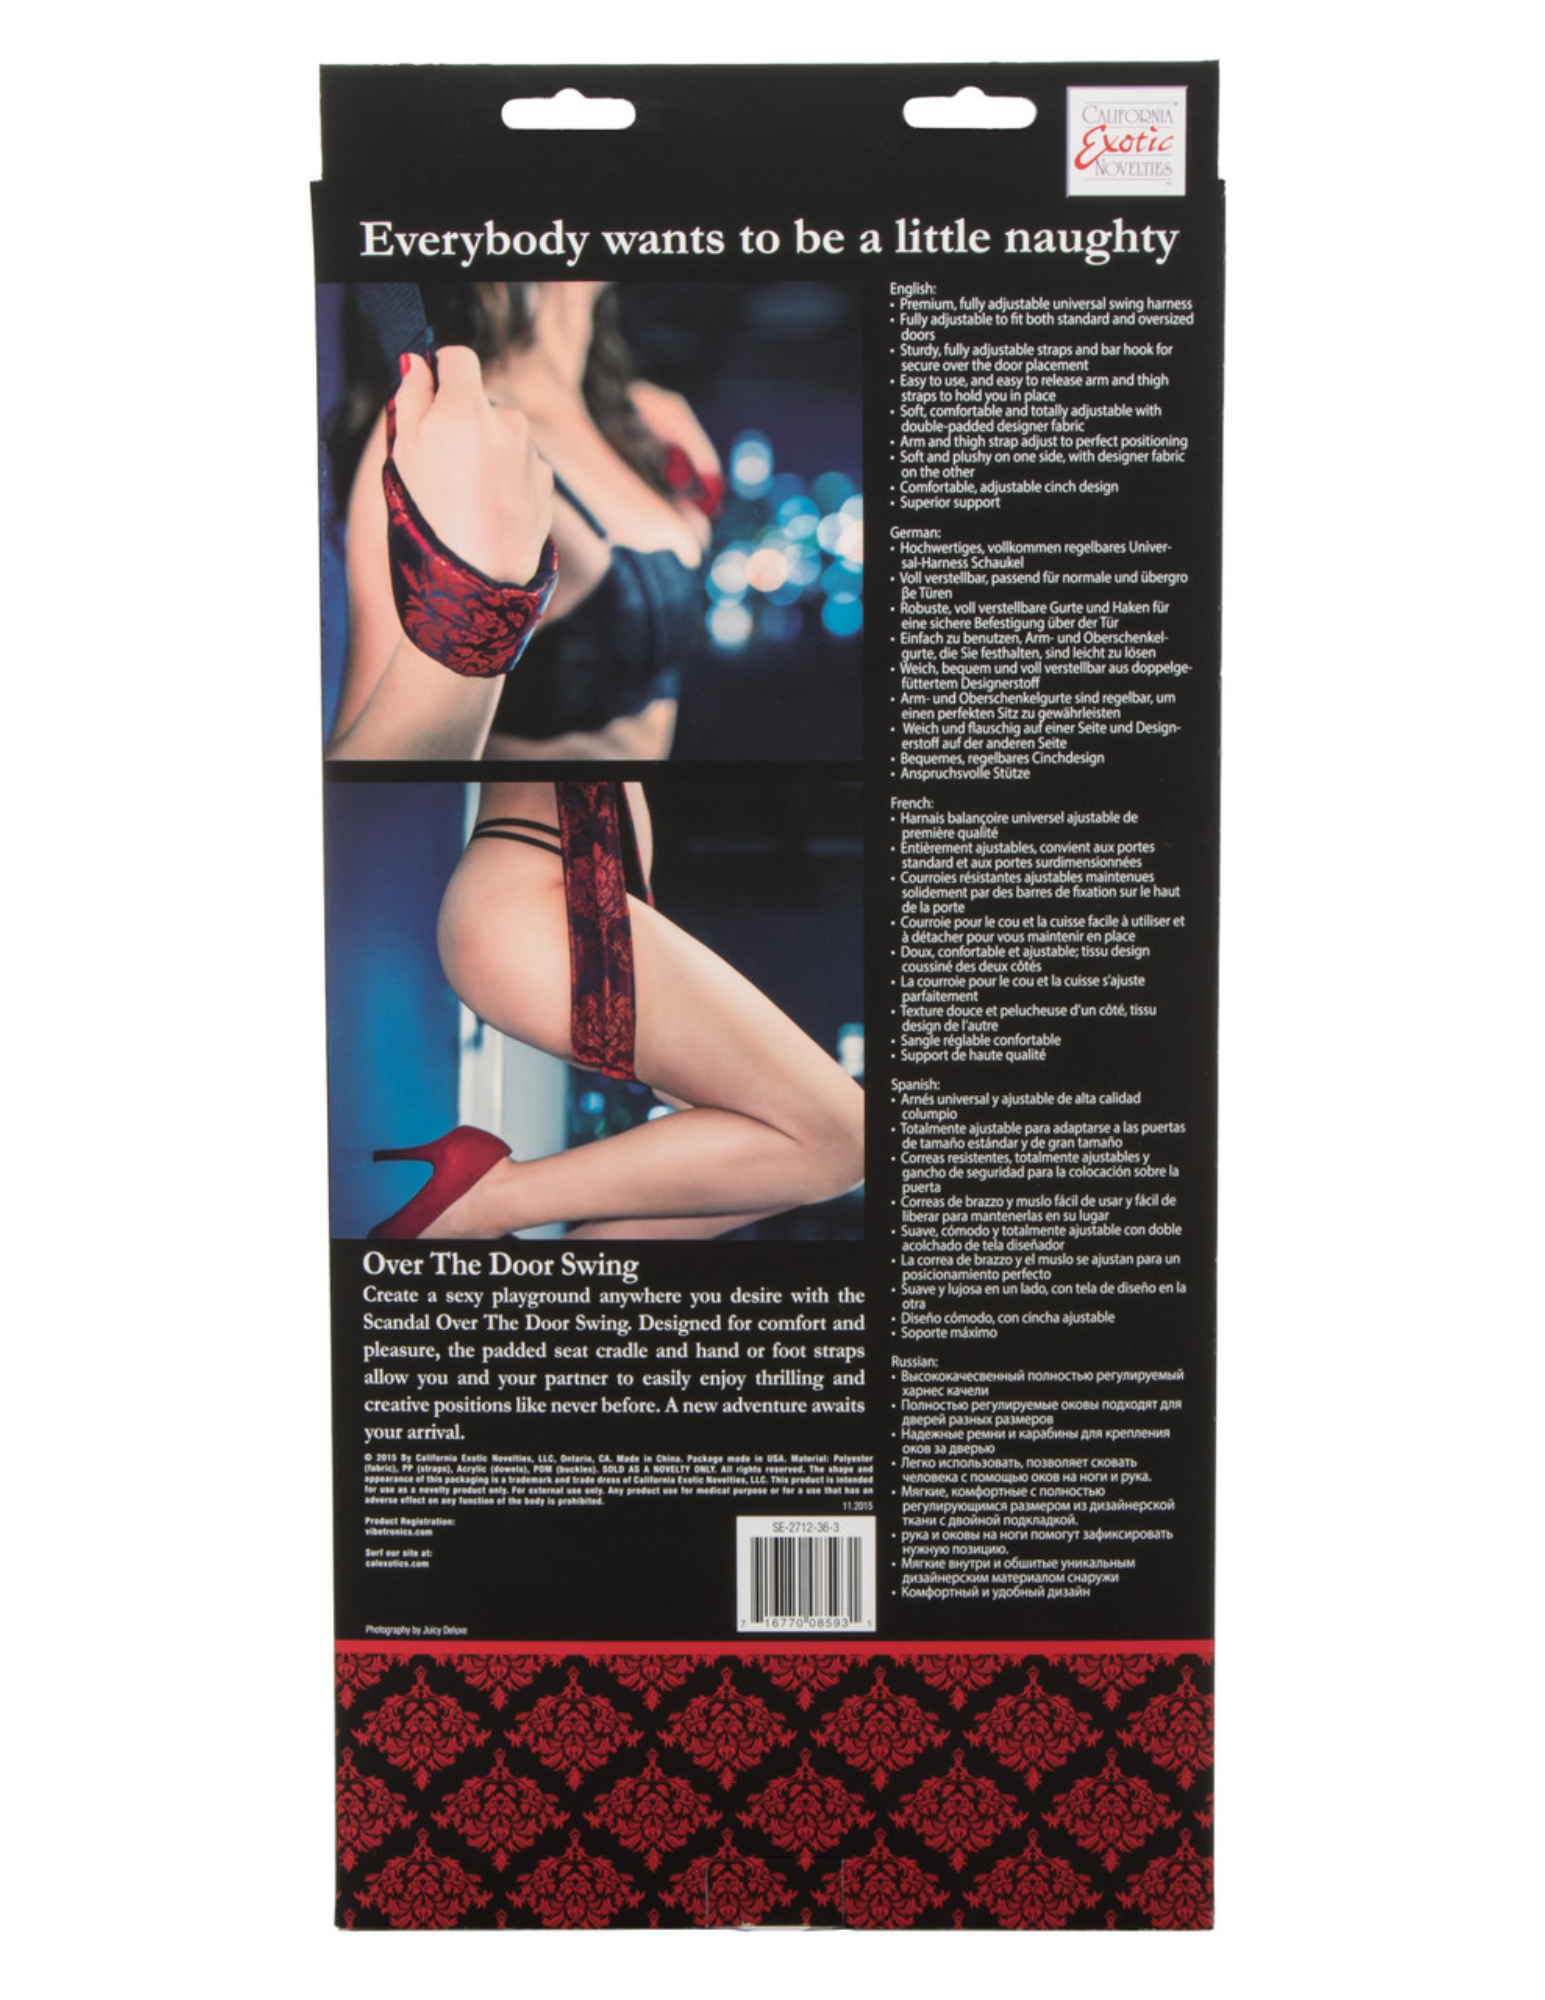 Photo of the back of the box for the Scandal Over the Door Swing (red/black) from CalExotics.